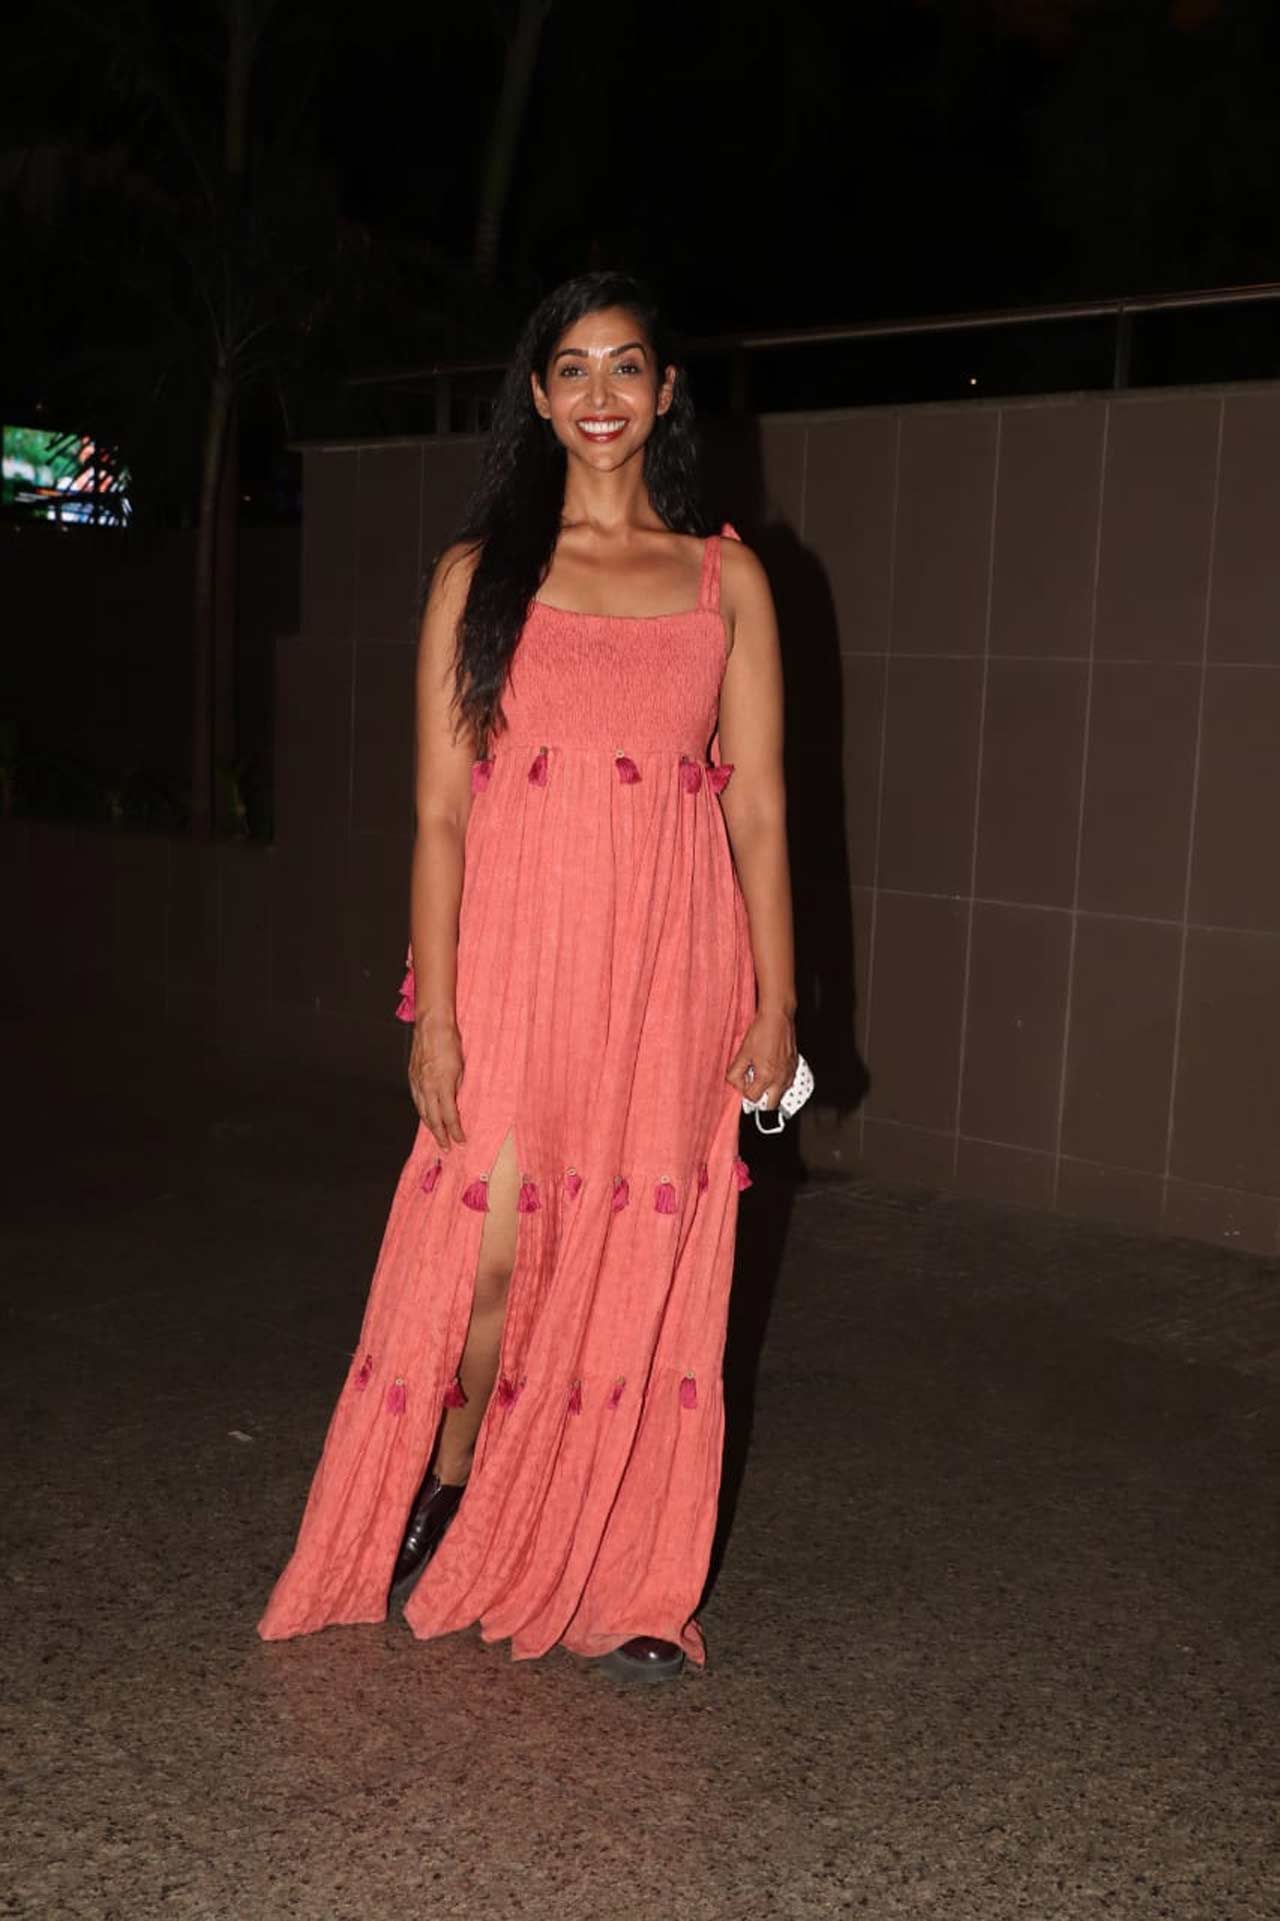 Anupriya Goenka, who rose to fame with her stint in the courtroom drama 'Criminal Justice', was all smiles when clicked at the airport. Her thigh-high slit casual maxi dress looked like an easy-breezy pick as a monsoon look.